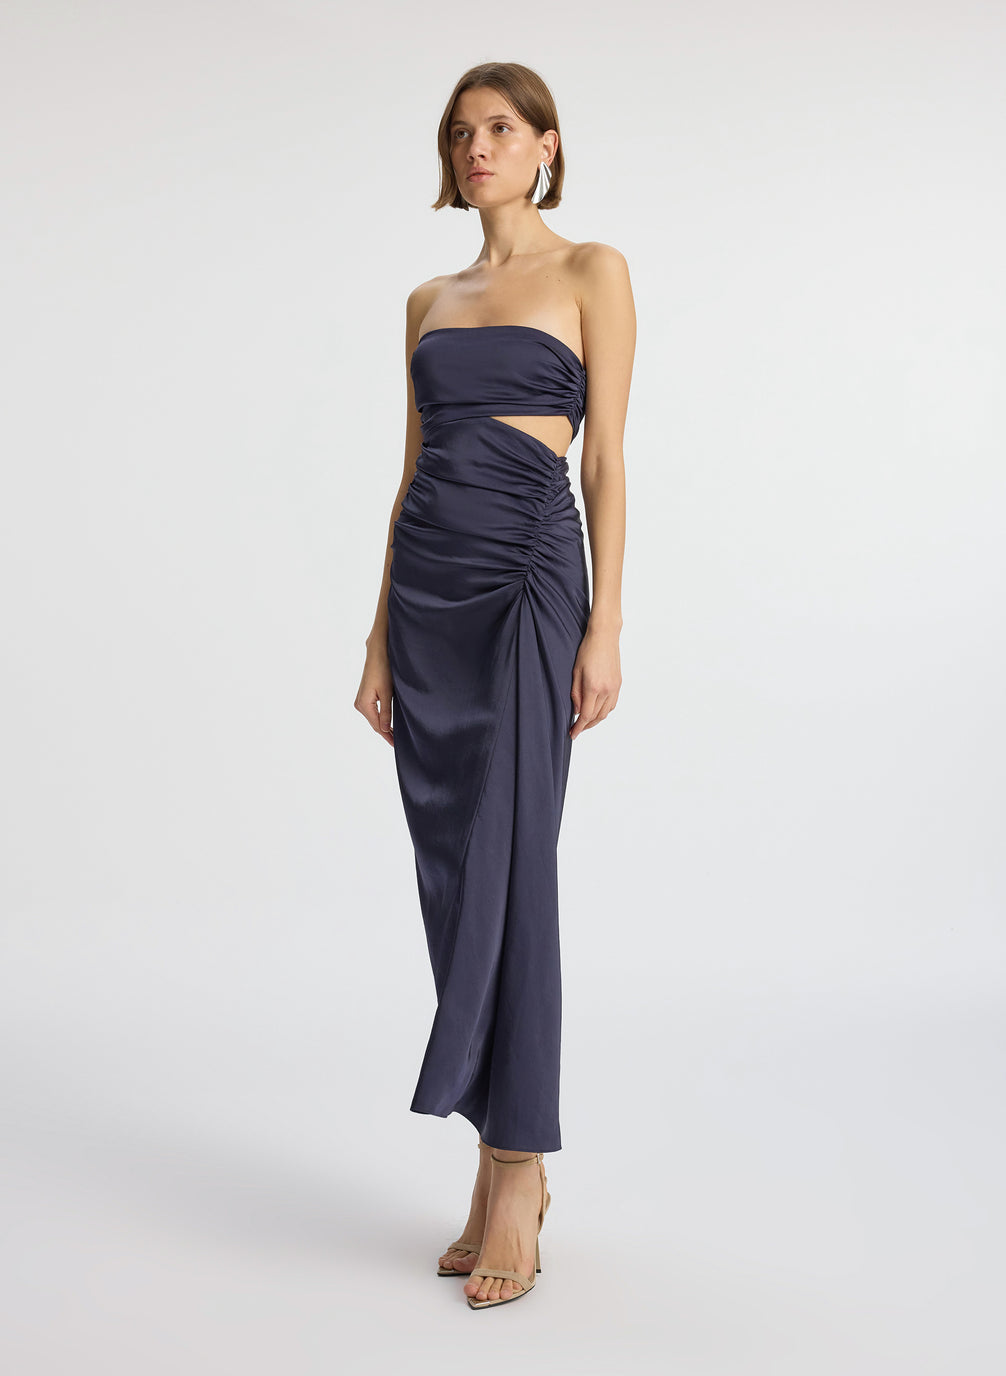 side view of woman wearing navy blue strapless midi dress